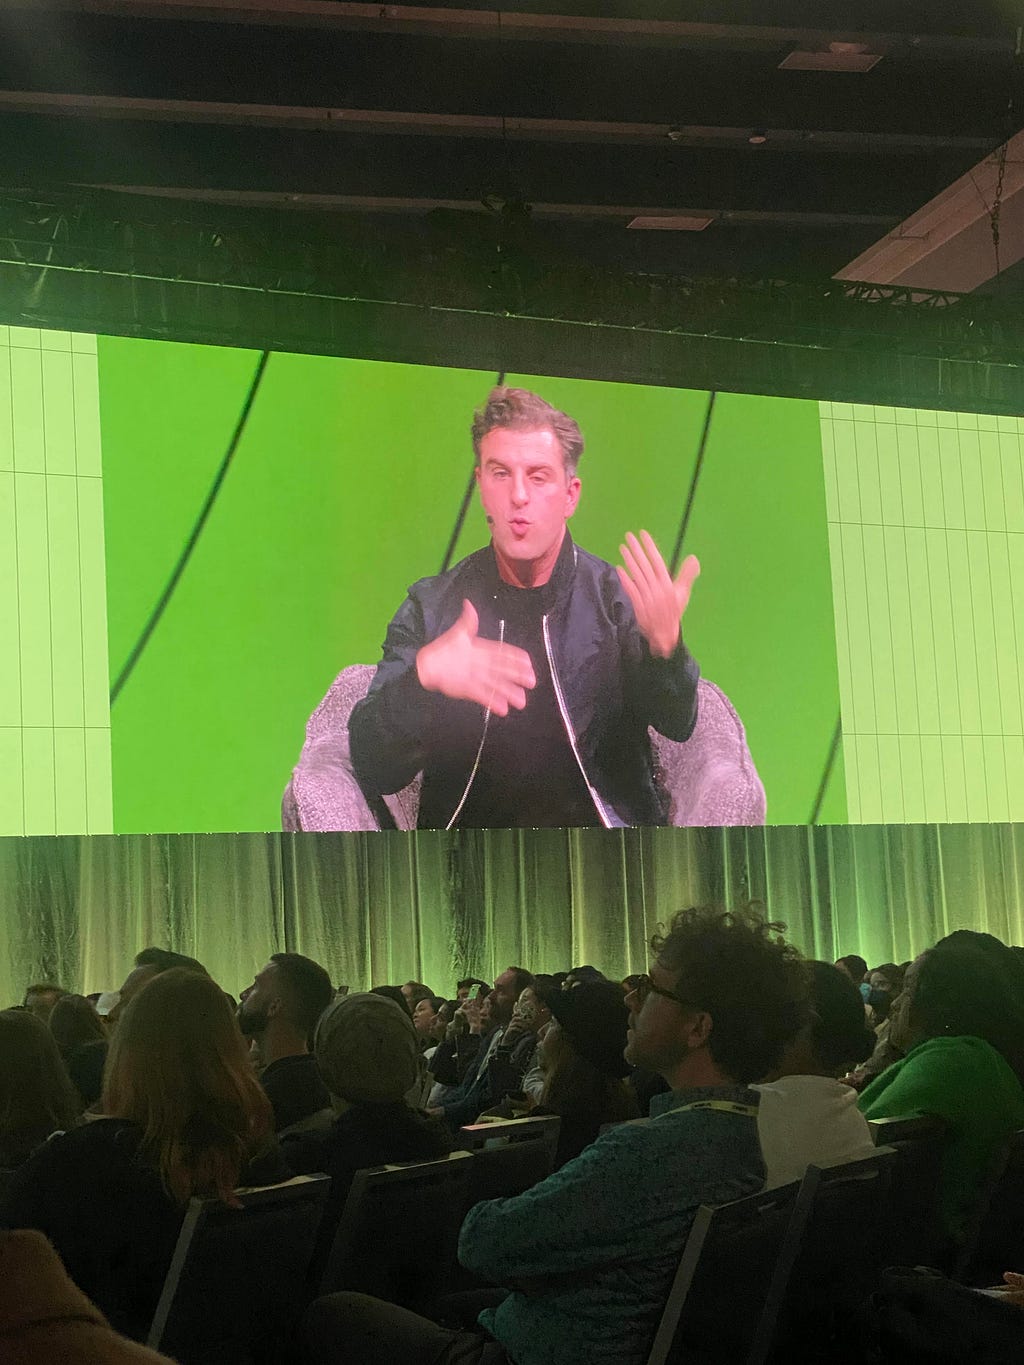 Airbnb CEO Brian Chesky speaking in a conversation with Figma CEO Dylan Field